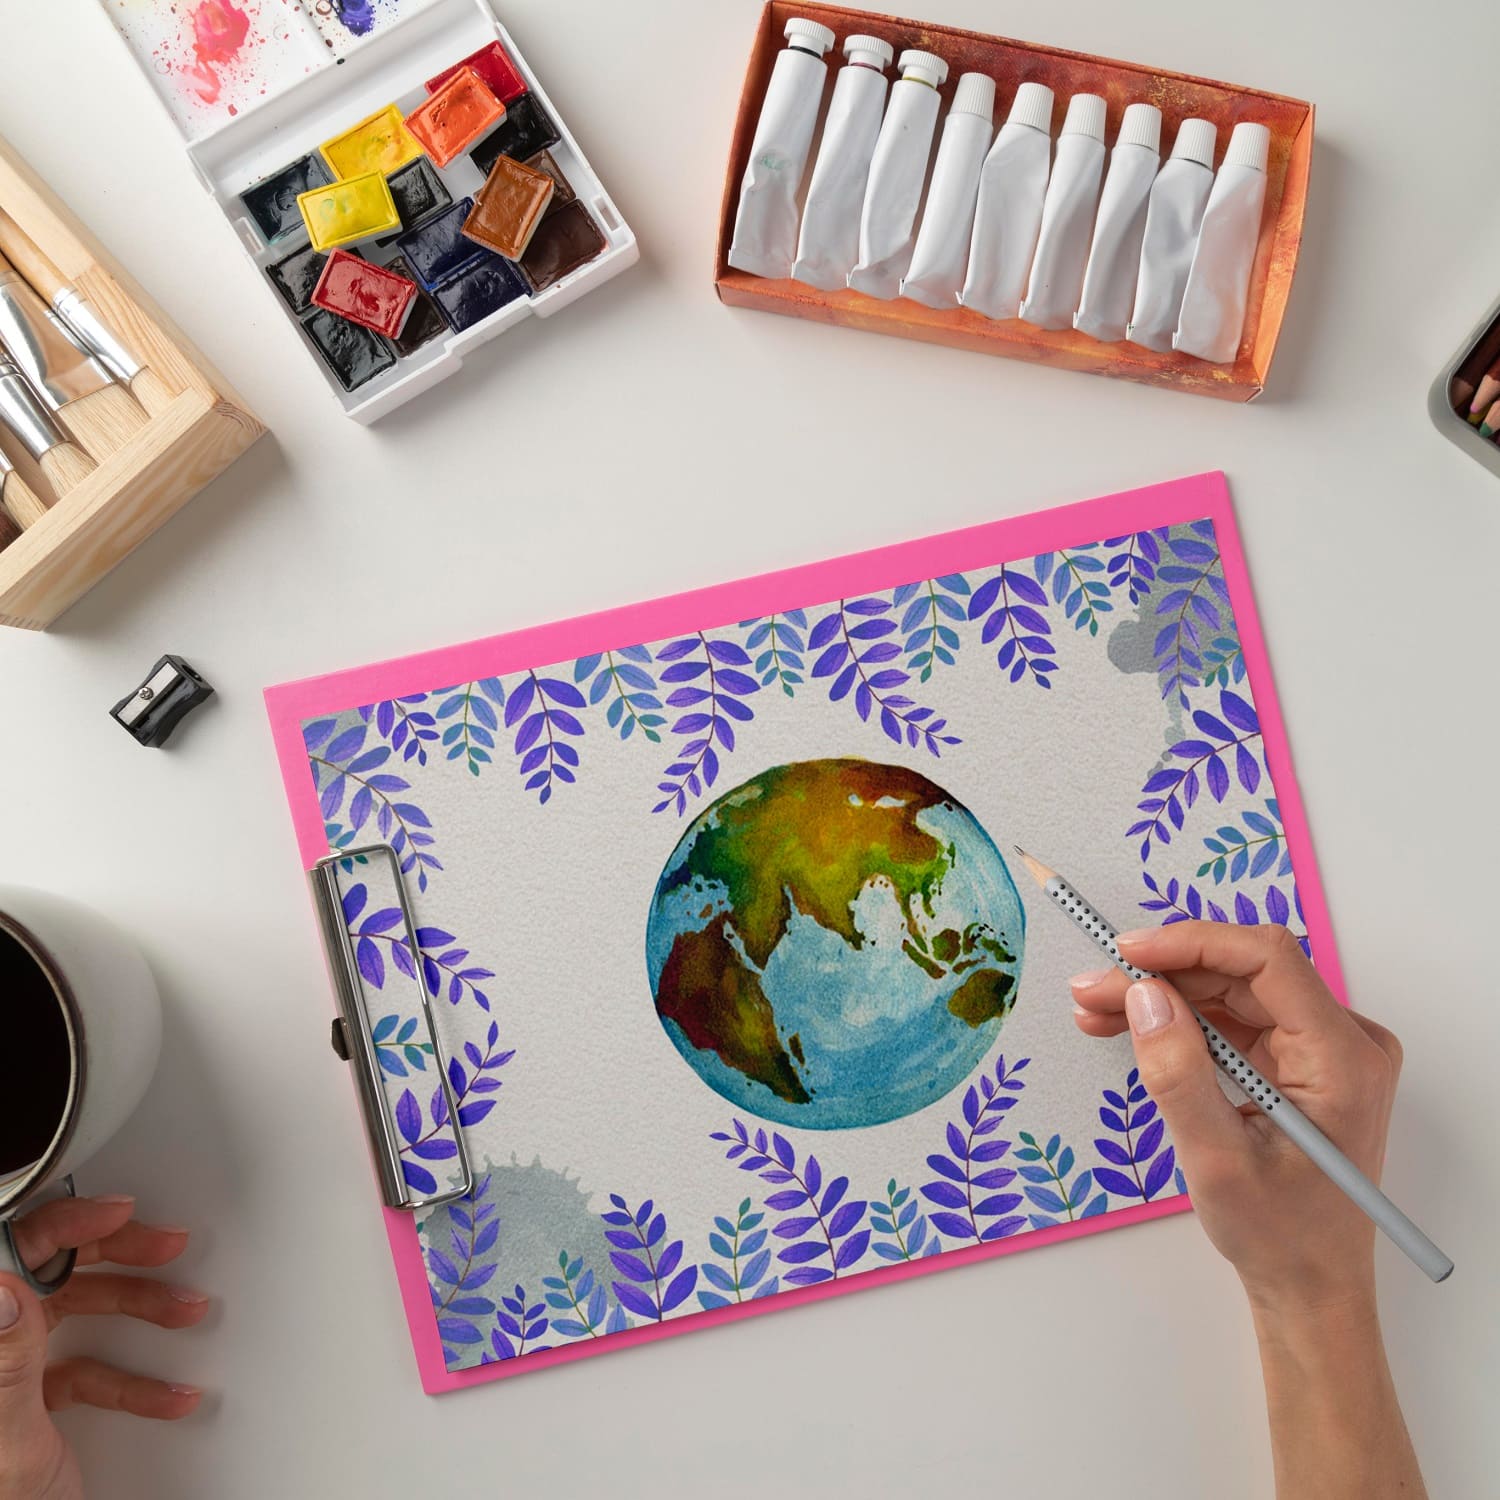 A watercolor planet Earth is drawn on a white sheet of paper.